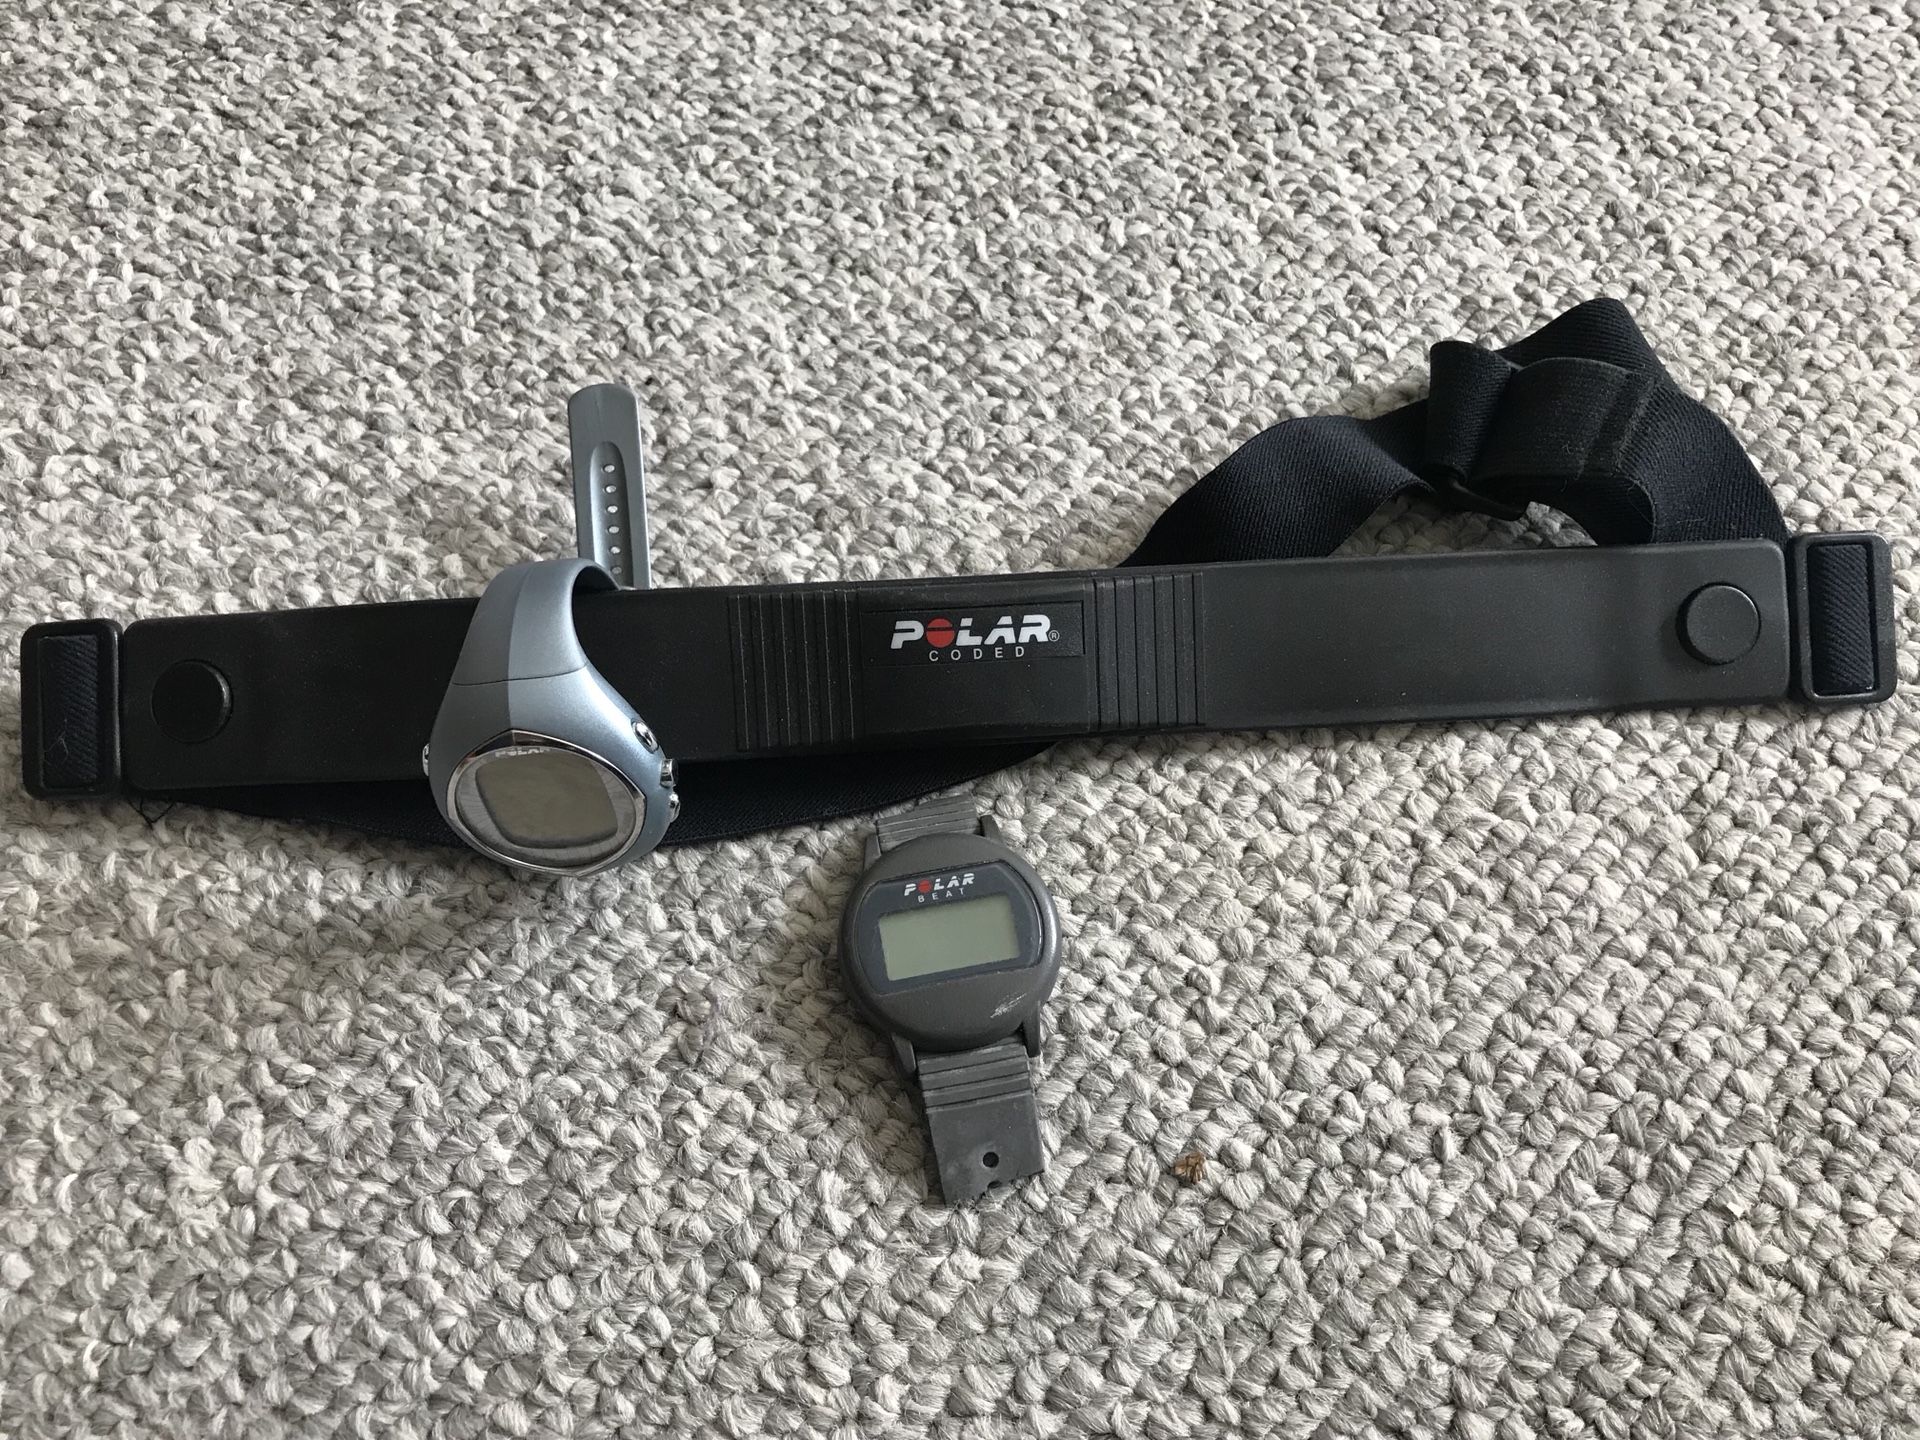 Polar coded heart rate monitor with watch